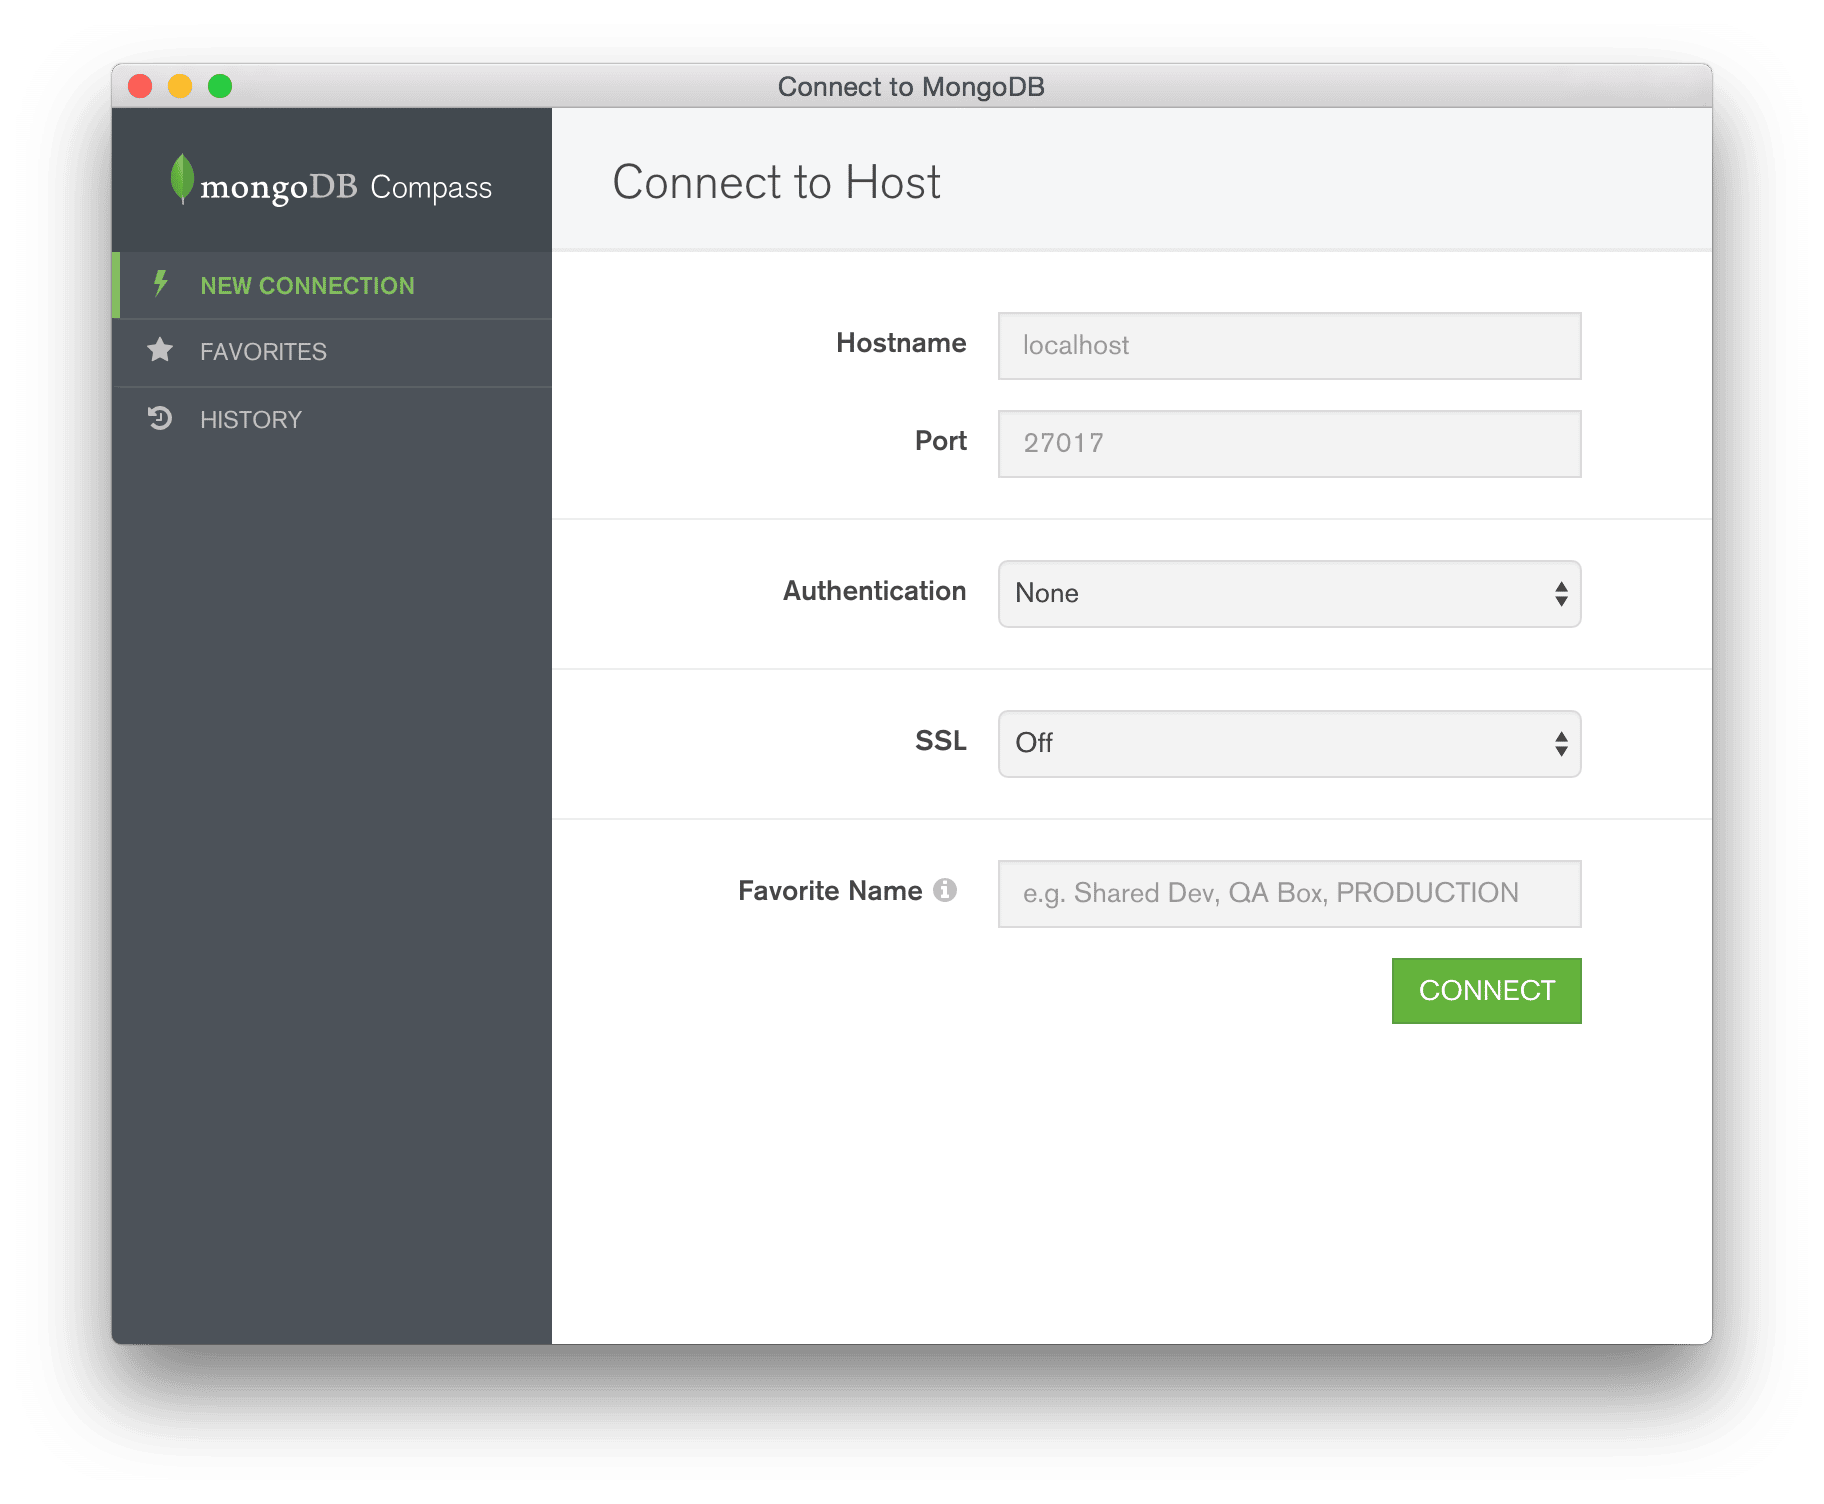 MongoDB Compass: New Connection Form